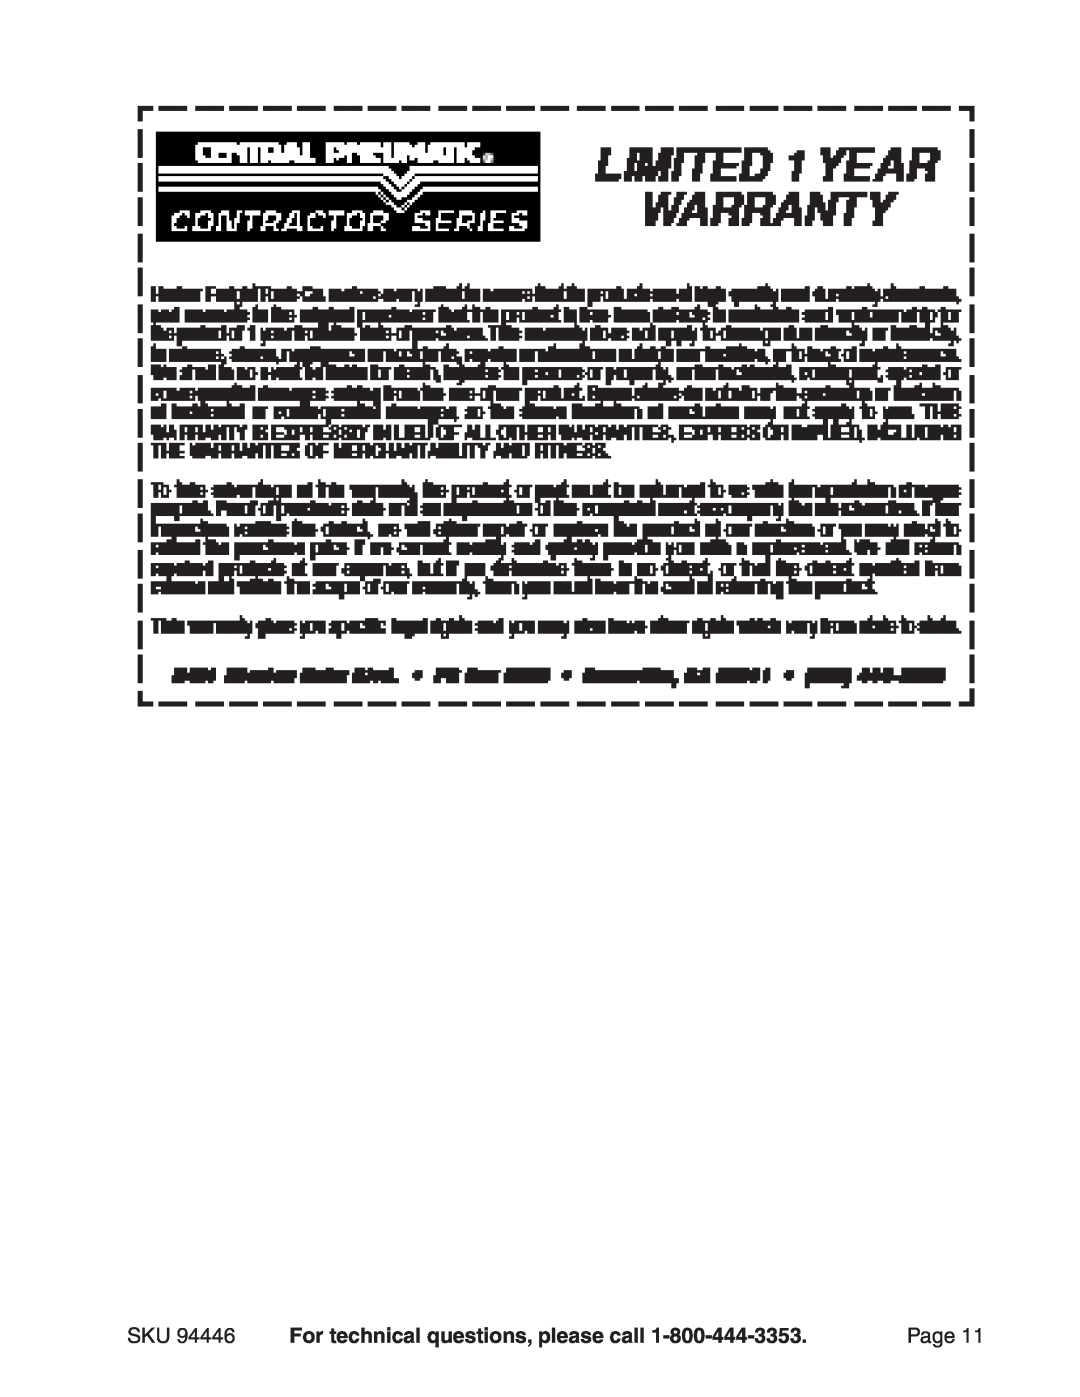 Harbor Freight Tools 94446 operating instructions For technical questions, please call, Page 